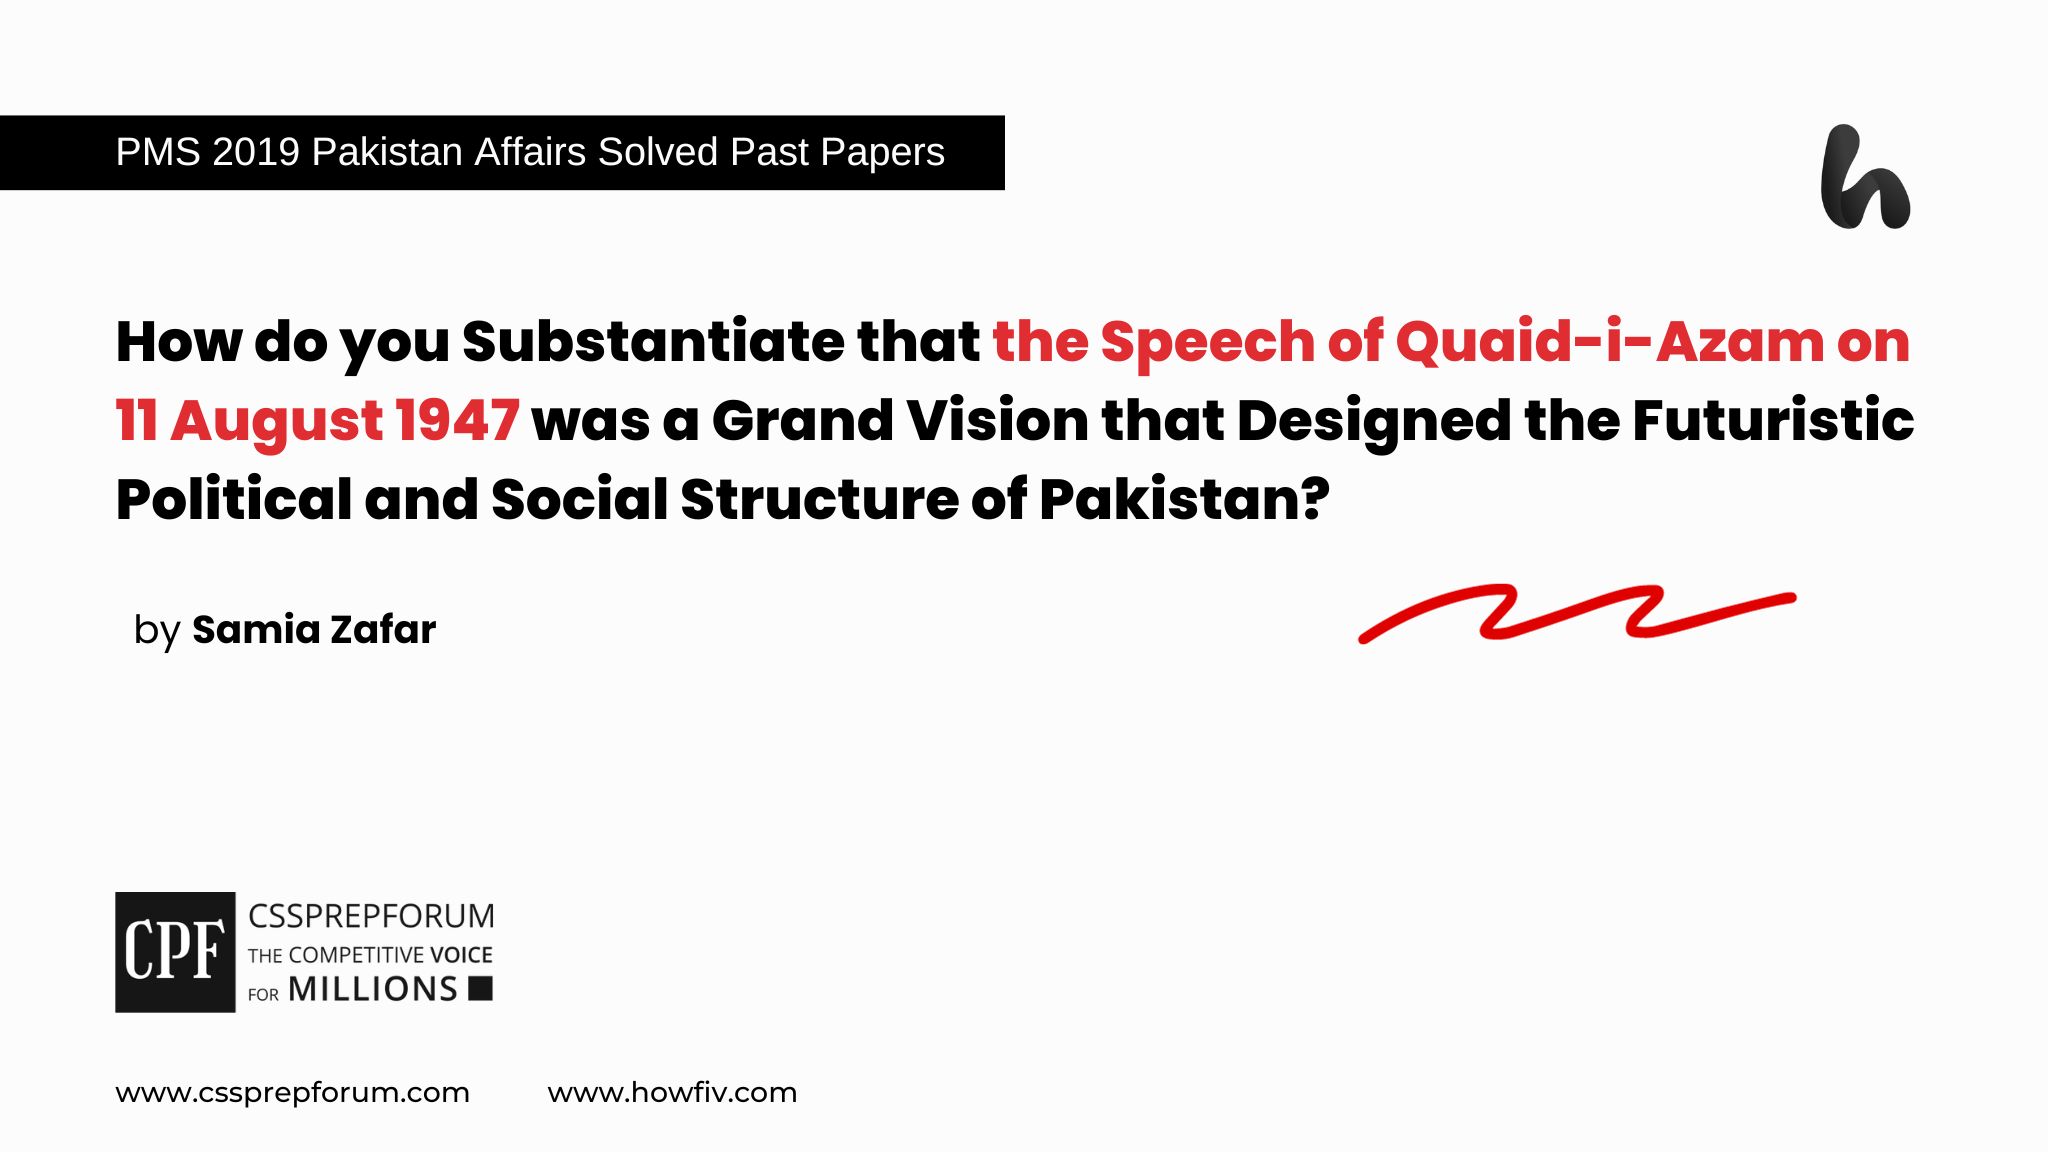 How do you Substantiate that the Speech of Quaid-i-Azam on 11 August 1947 was a Grand Vision that Designed the Futuristic Political and Social Structure of Pakistan